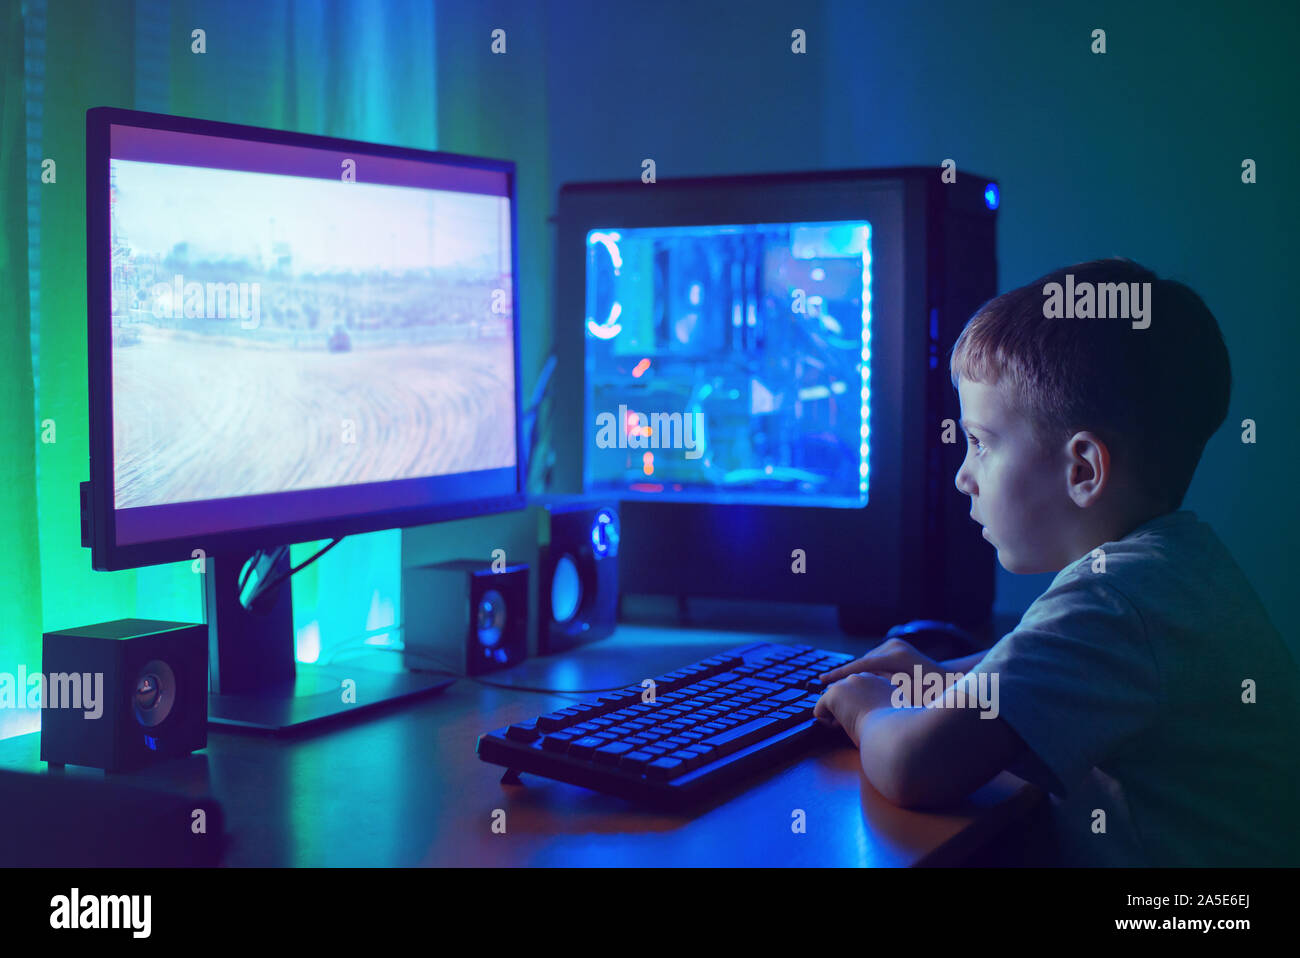 Gaming Room Desk Stock Photos Gaming Room Desk Stock Images Alamy